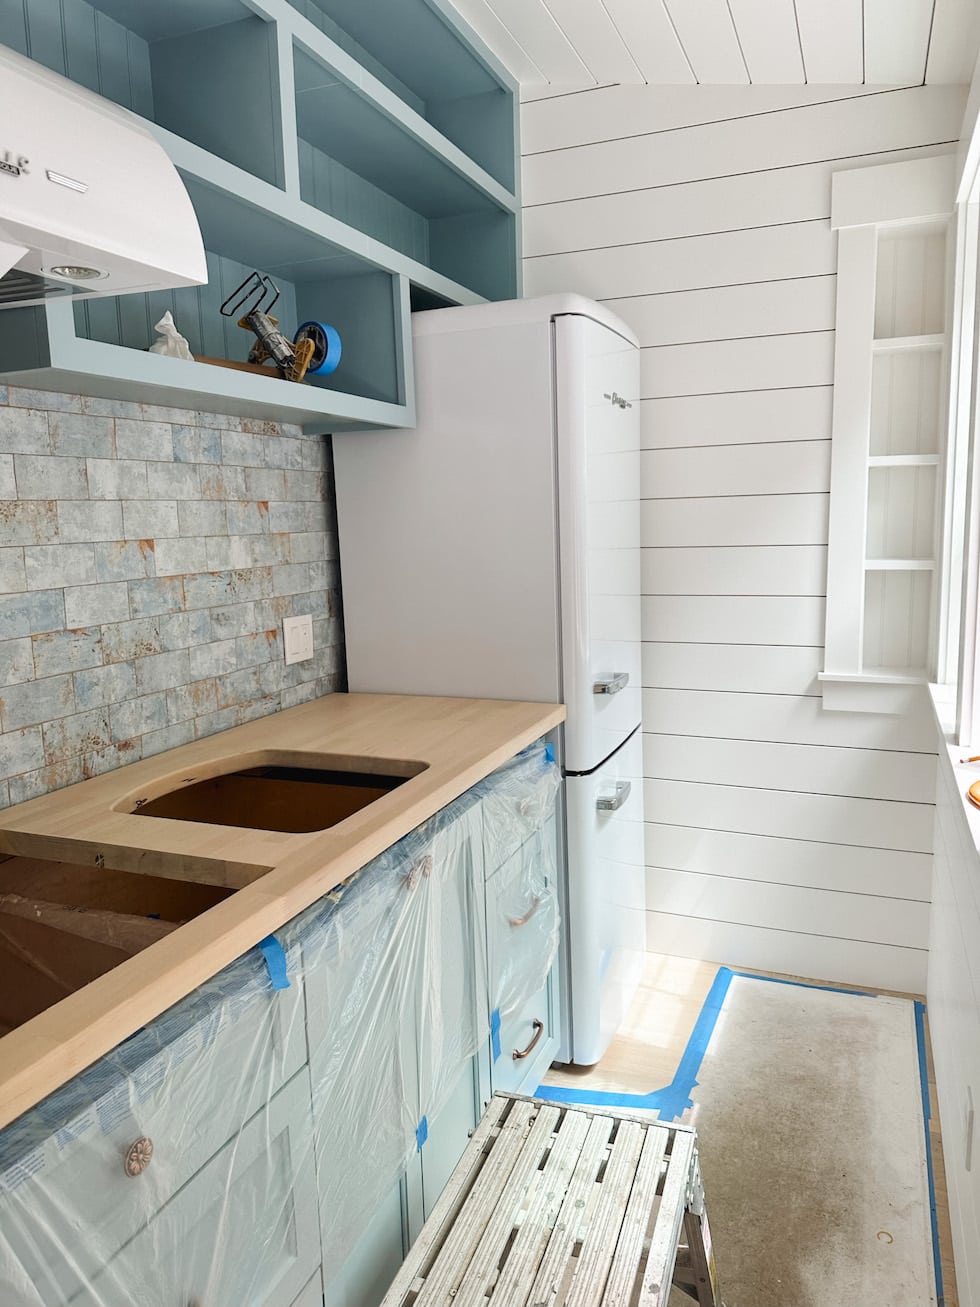 Tiny Cottage: Interior + Exterior, Kitchenette, Backyard Updates and more!